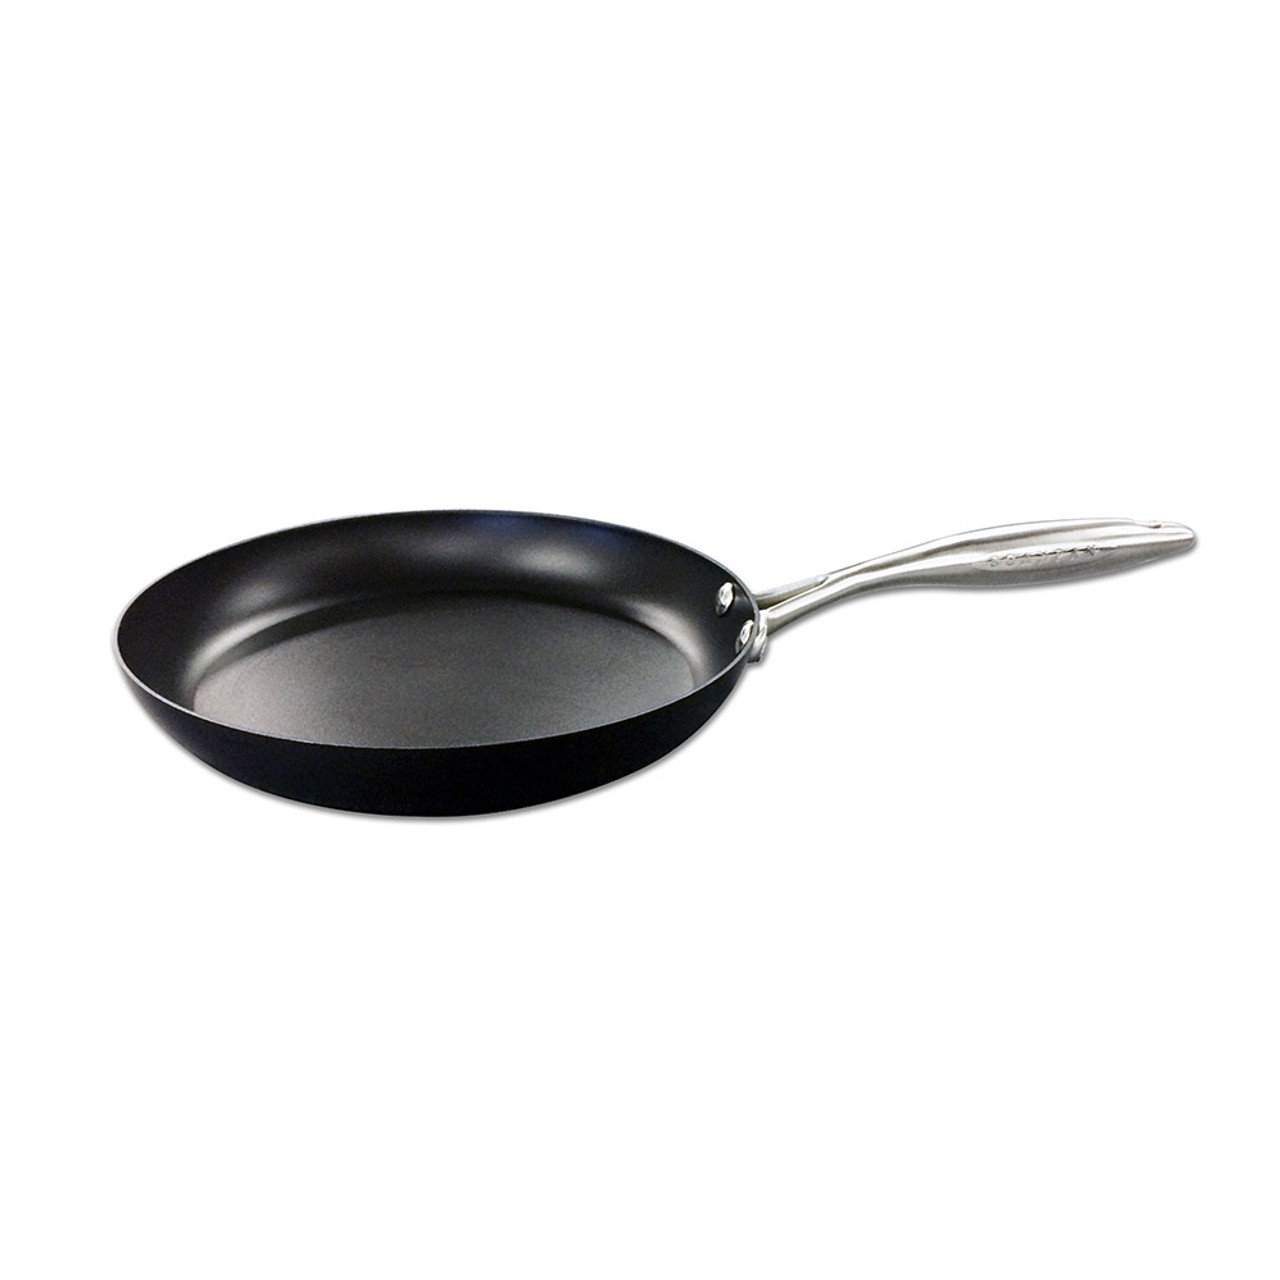 https://cdn11.bigcommerce.com/s-hccytny0od/images/stencil/1280x1280/products/2846/10048/scanpan-professional-fry-pan-12in__45877.1590683690.jpg?c=2?imbypass=on